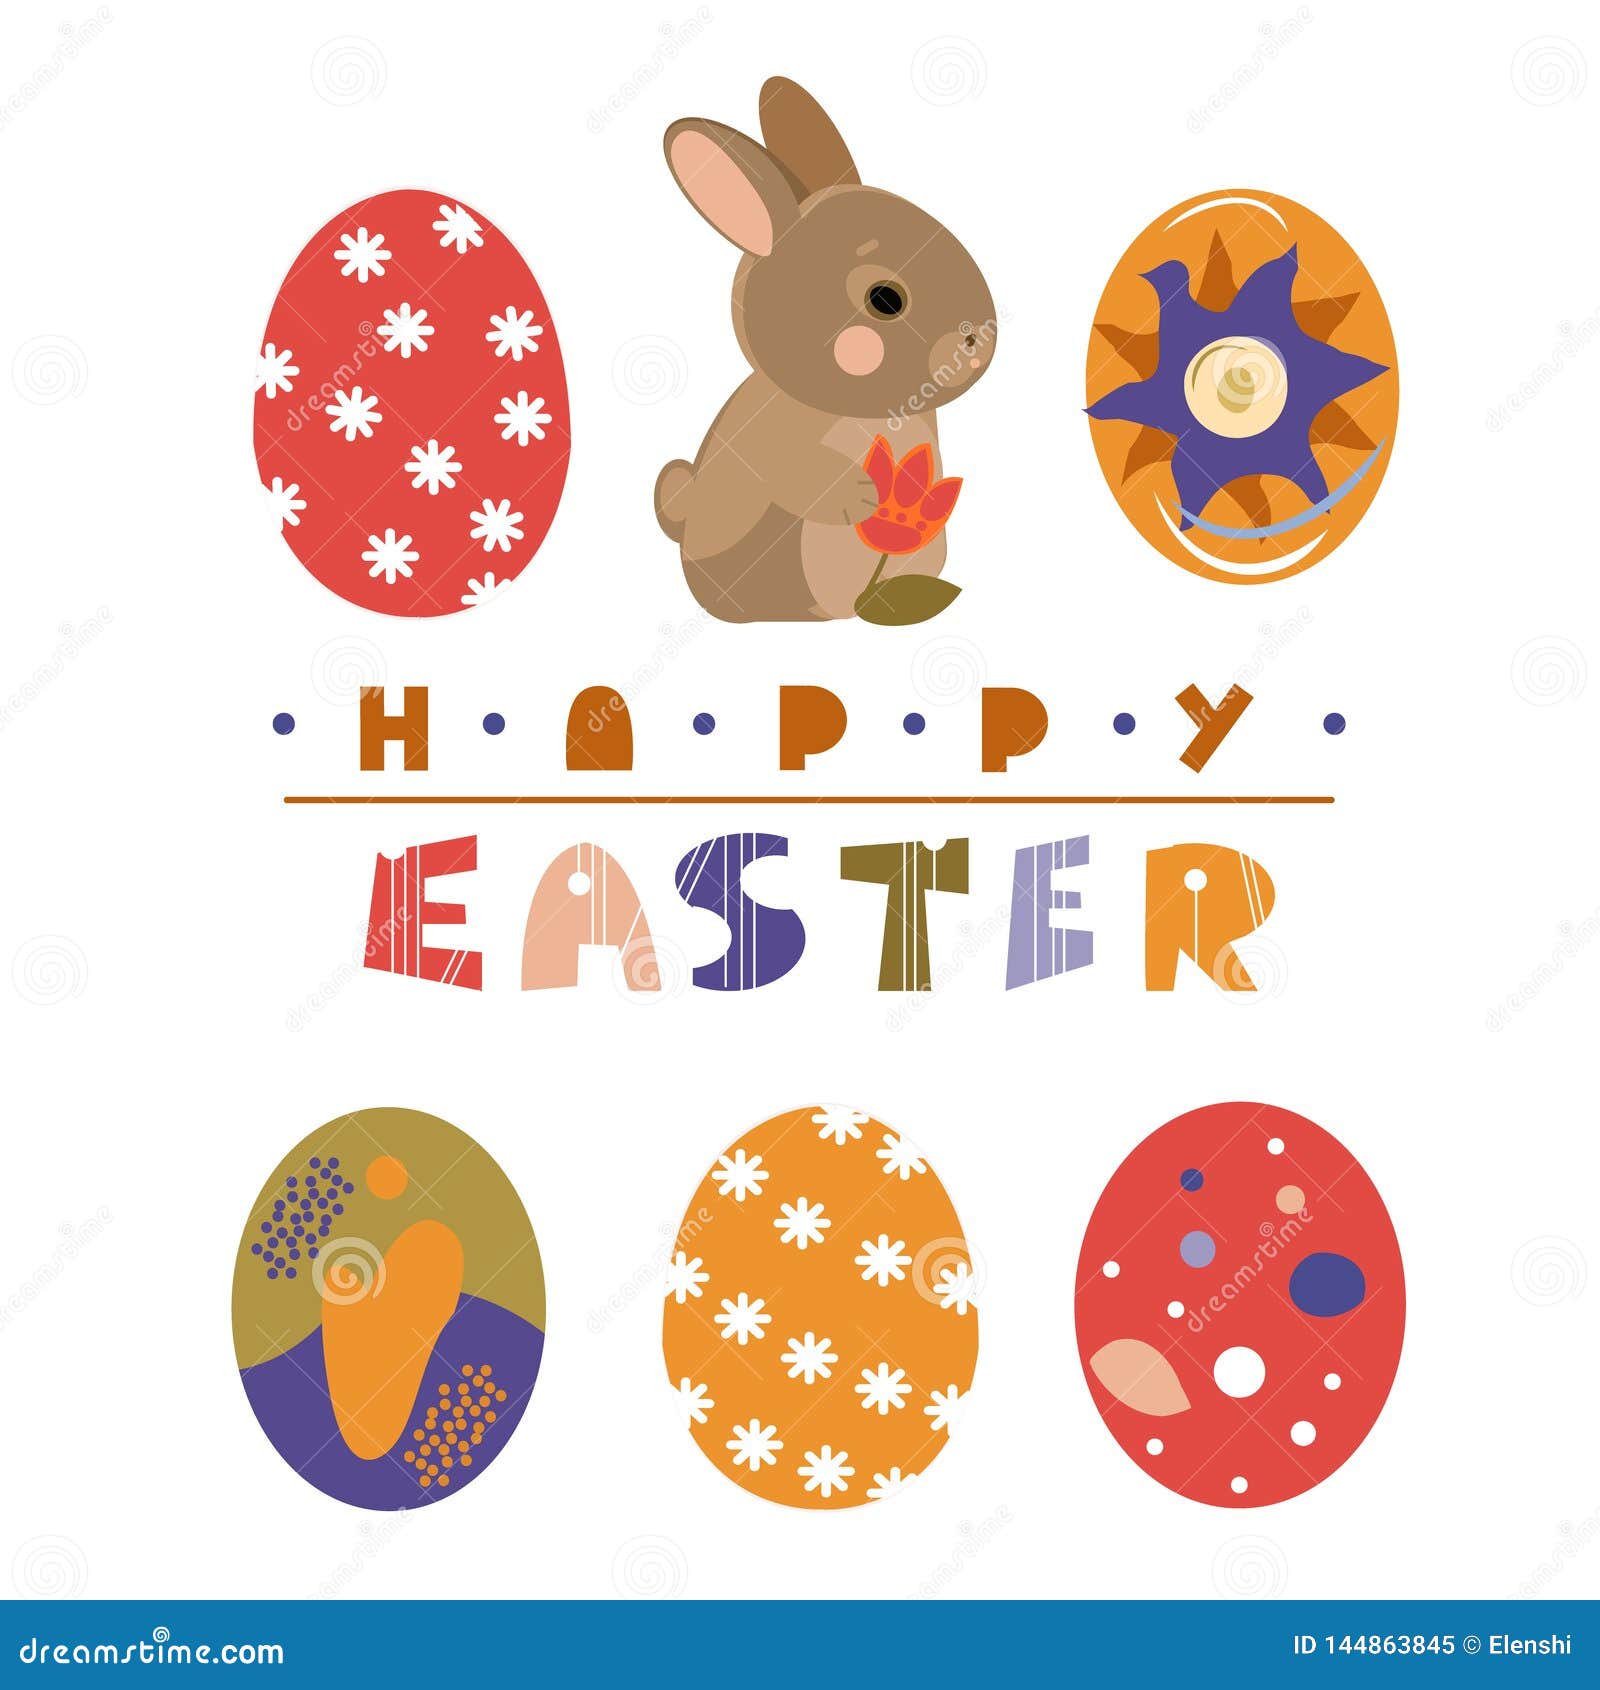 Colorful Sweet Happy Easter Greeting Card. Vector Image of Easter ...